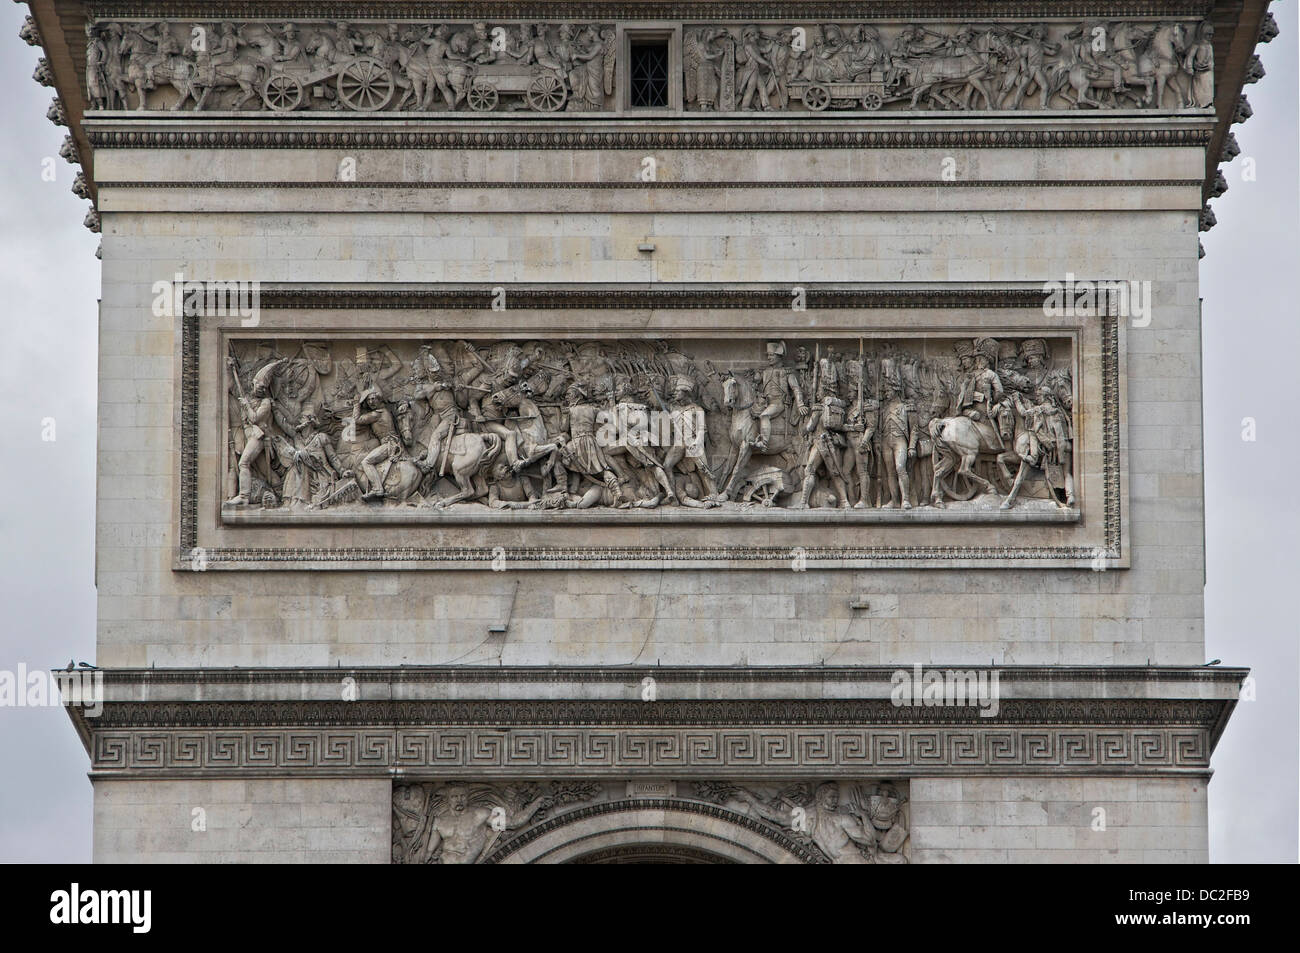 Details of the northern façade of the Arc-de-Triomphe de l'Etoile in Paris, France. In the middle, the 'Battle of Austerlitz', b Stock Photo